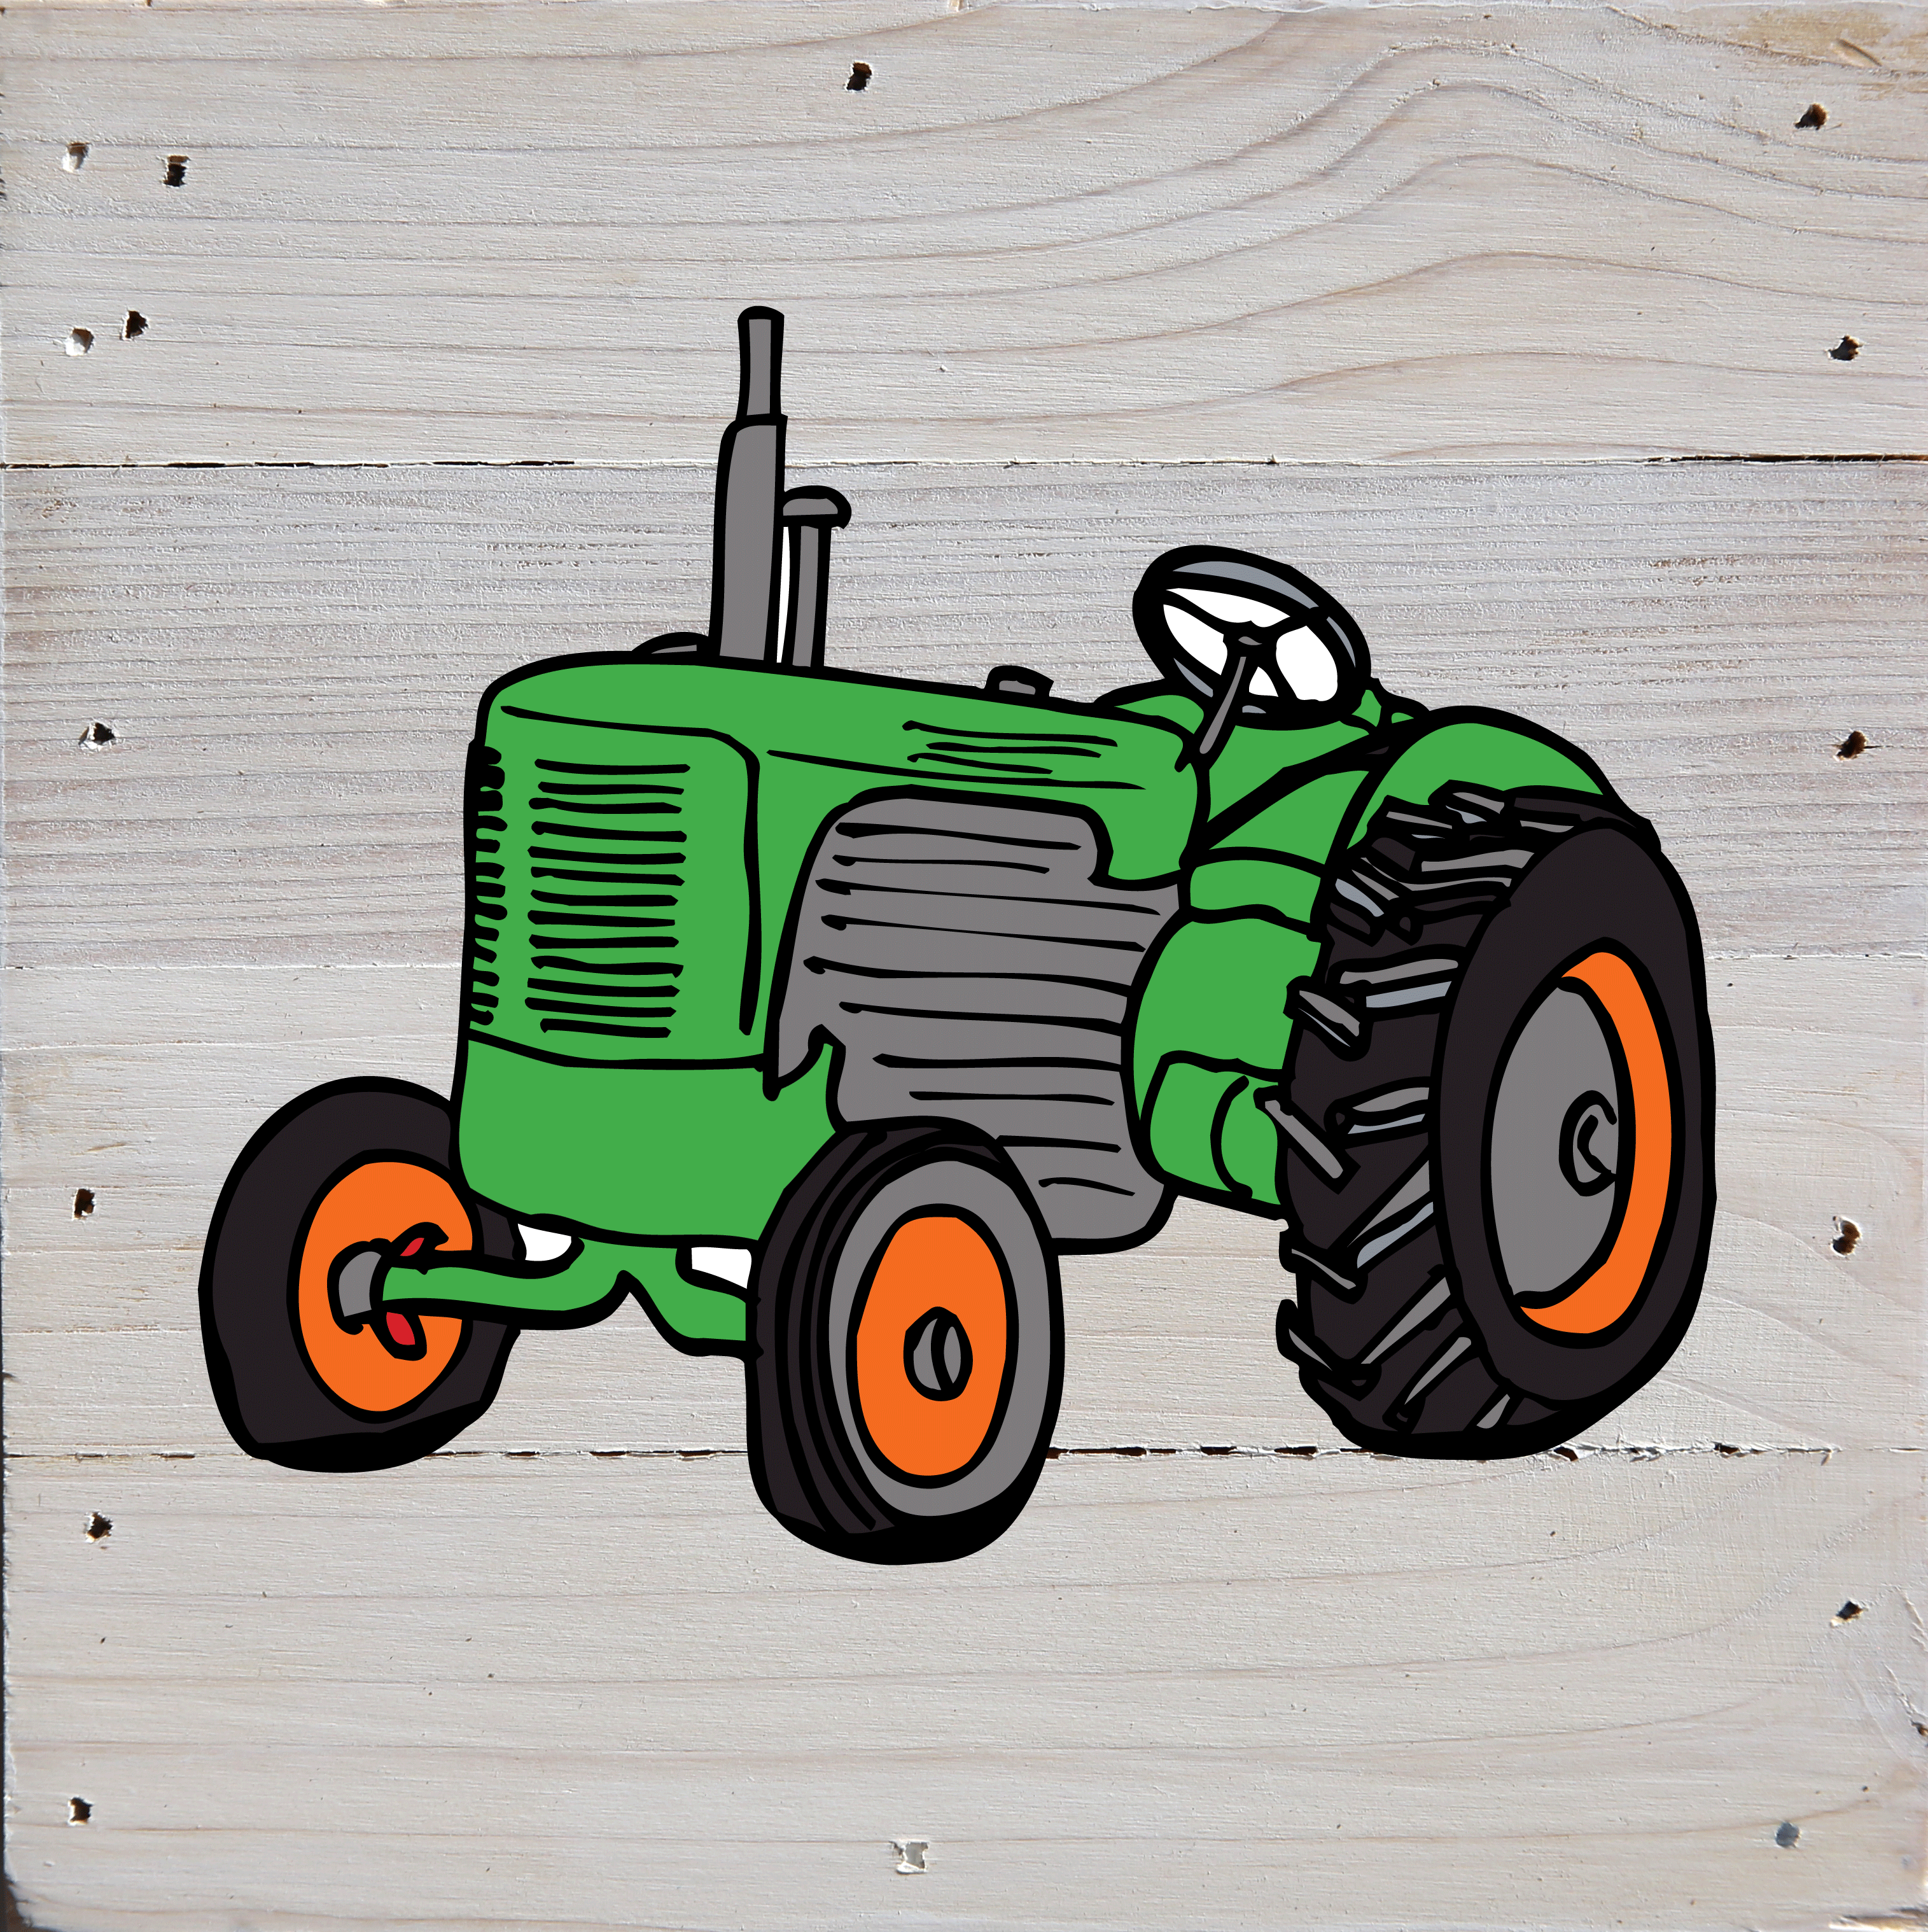 Tractor Art Prints on a White Washed 6 x 6 Rustic Natural Wood Pallet